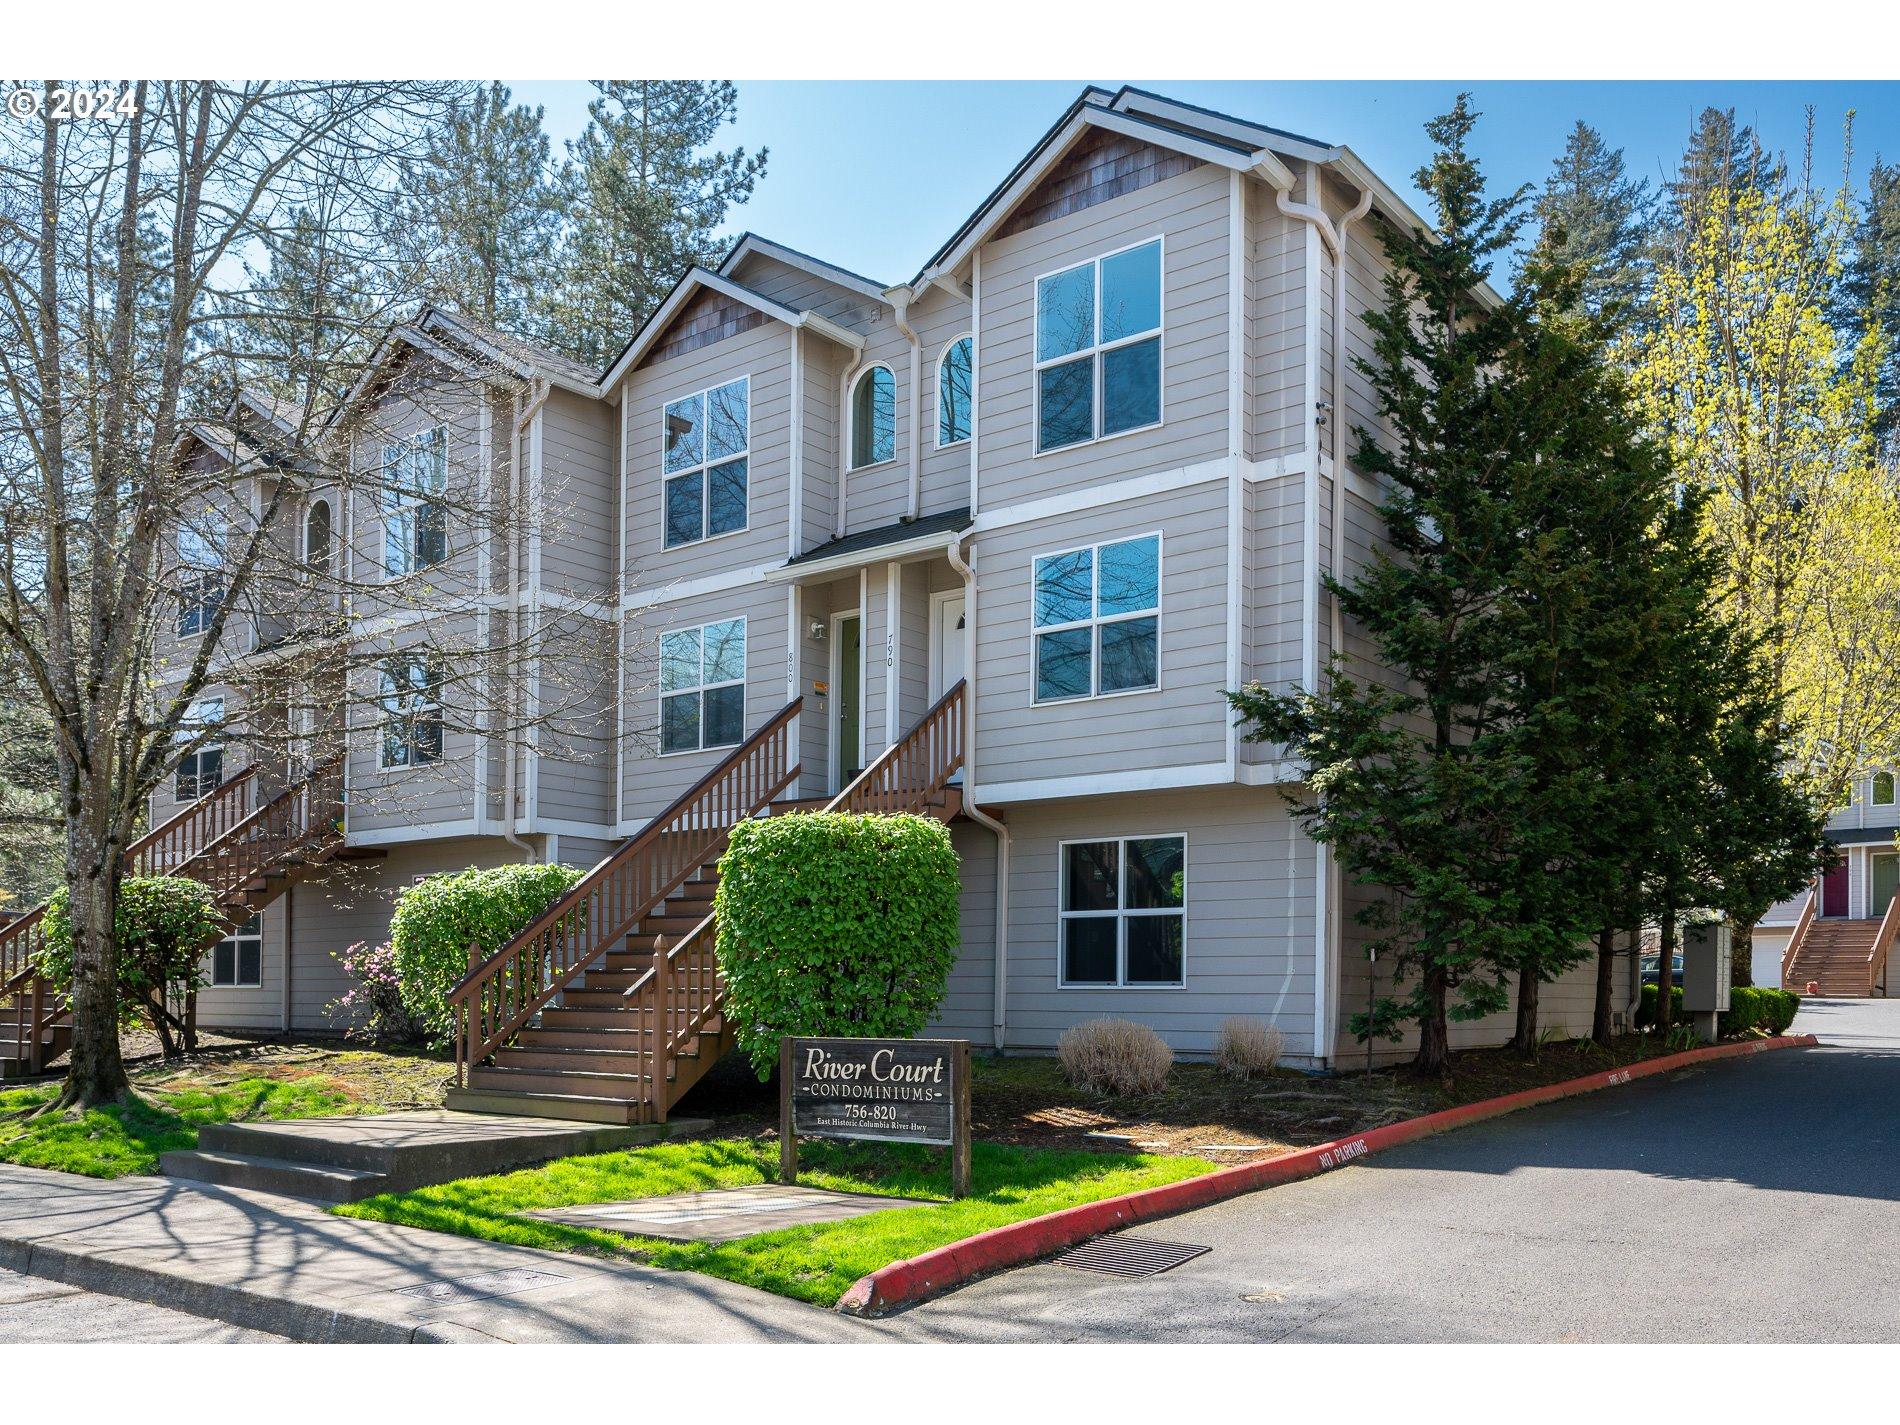 24501351, Troutdale, Condominium,  for sale, Cornell  Mann, CCIM, Great Western Commercial Real Estate Company